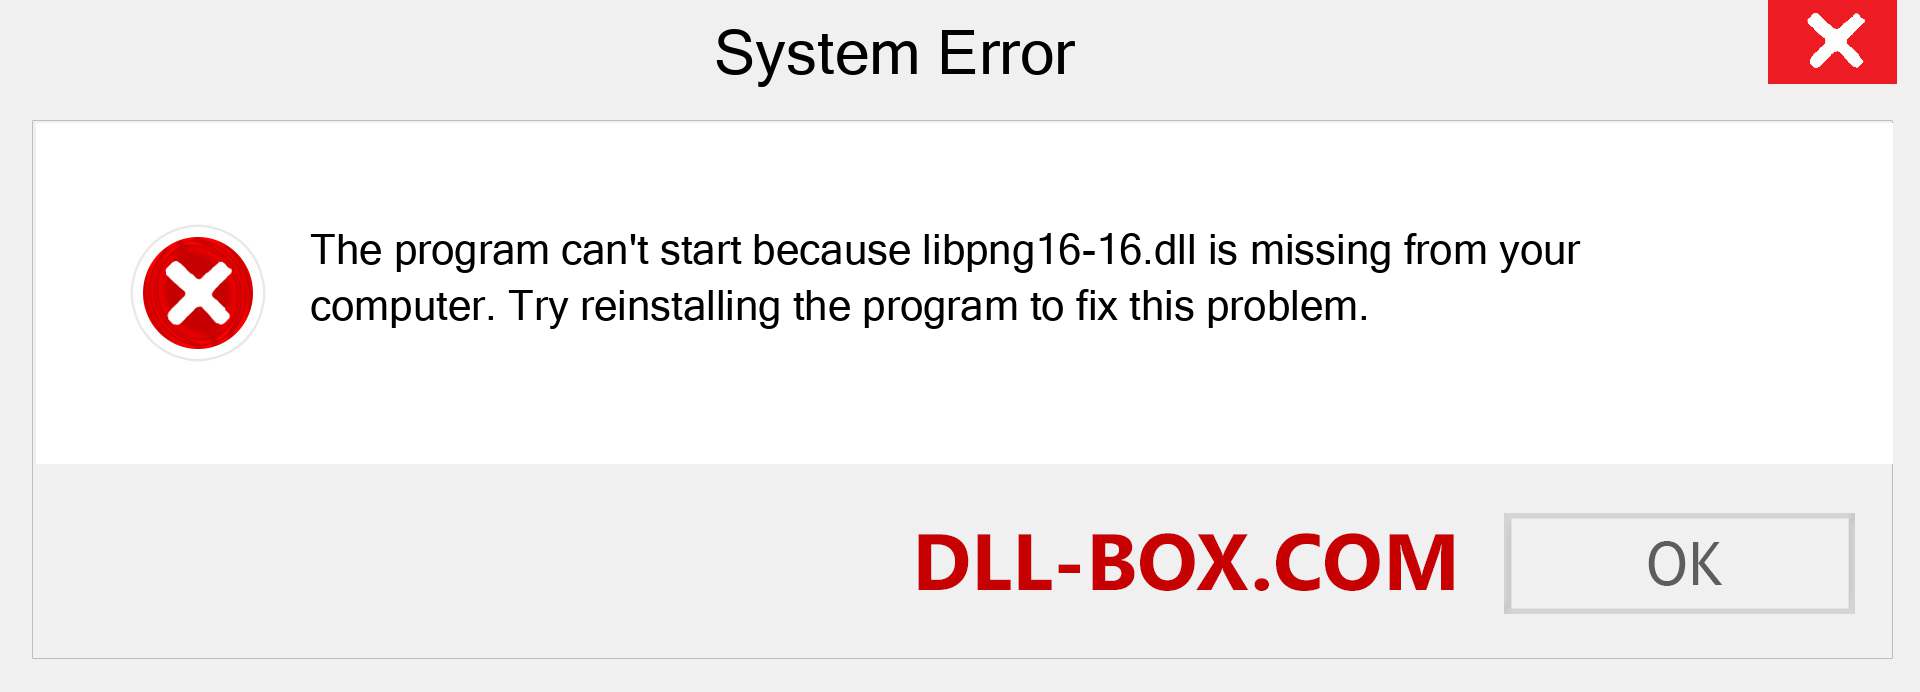  libpng16-16.dll file is missing?. Download for Windows 7, 8, 10 - Fix  libpng16-16 dll Missing Error on Windows, photos, images